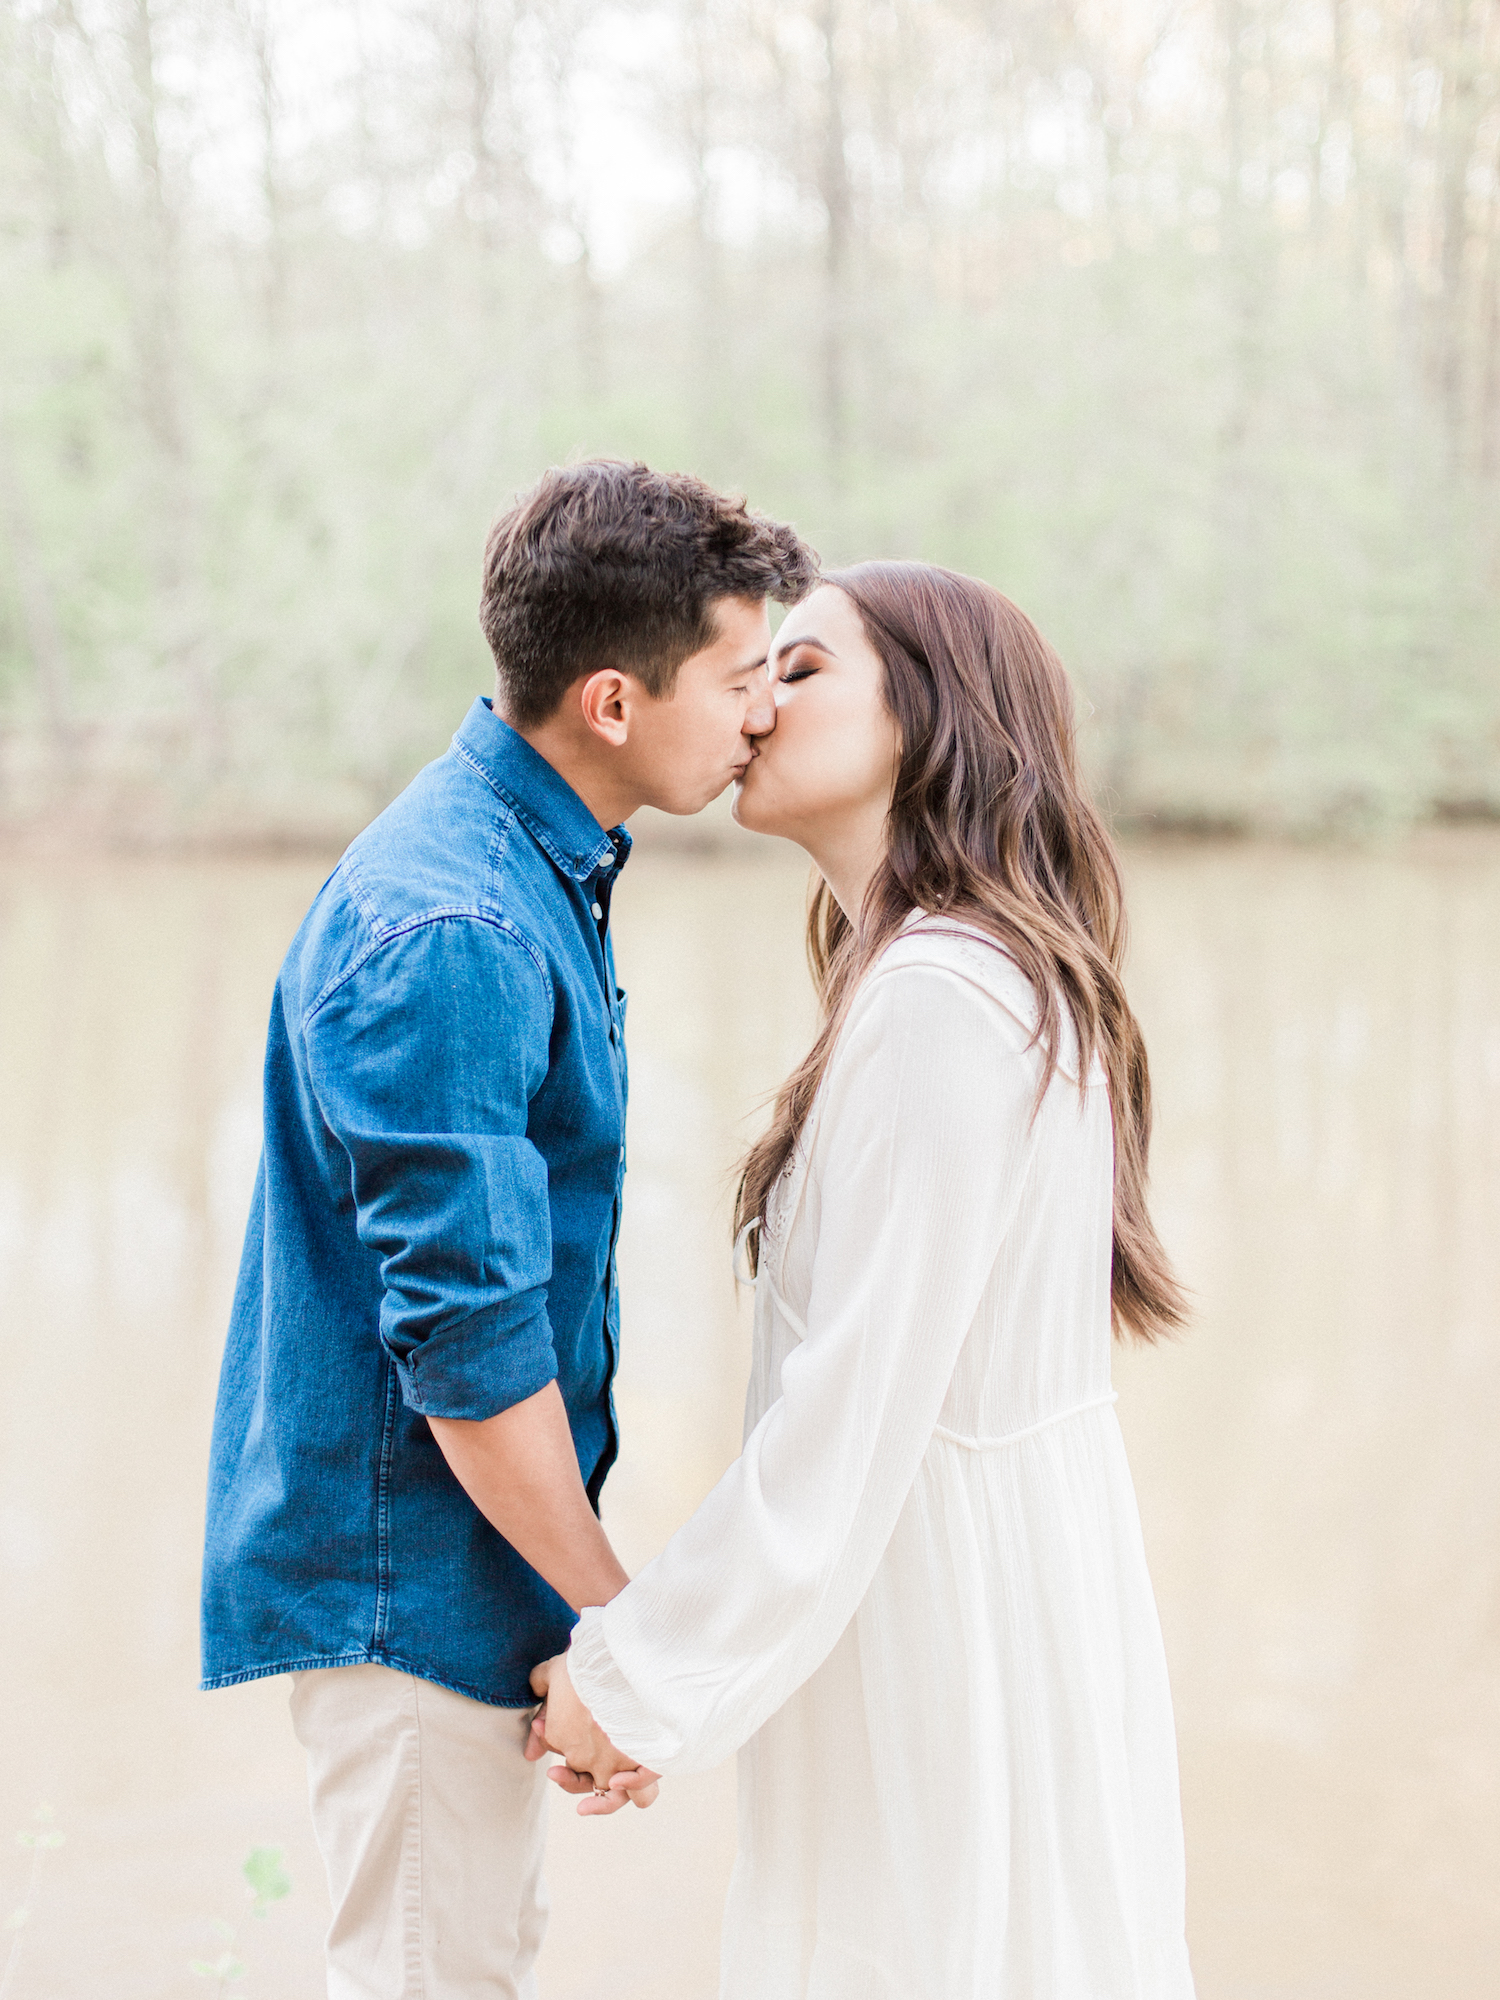 Spring engagement session at Sweetwater Creek State Park in north Georgia. Featuring white, neutral outfits and natural and organic elements. Photo by Kesia Marie Photography - fine art wedding and portrait photographer in Atlanta, Georgia.